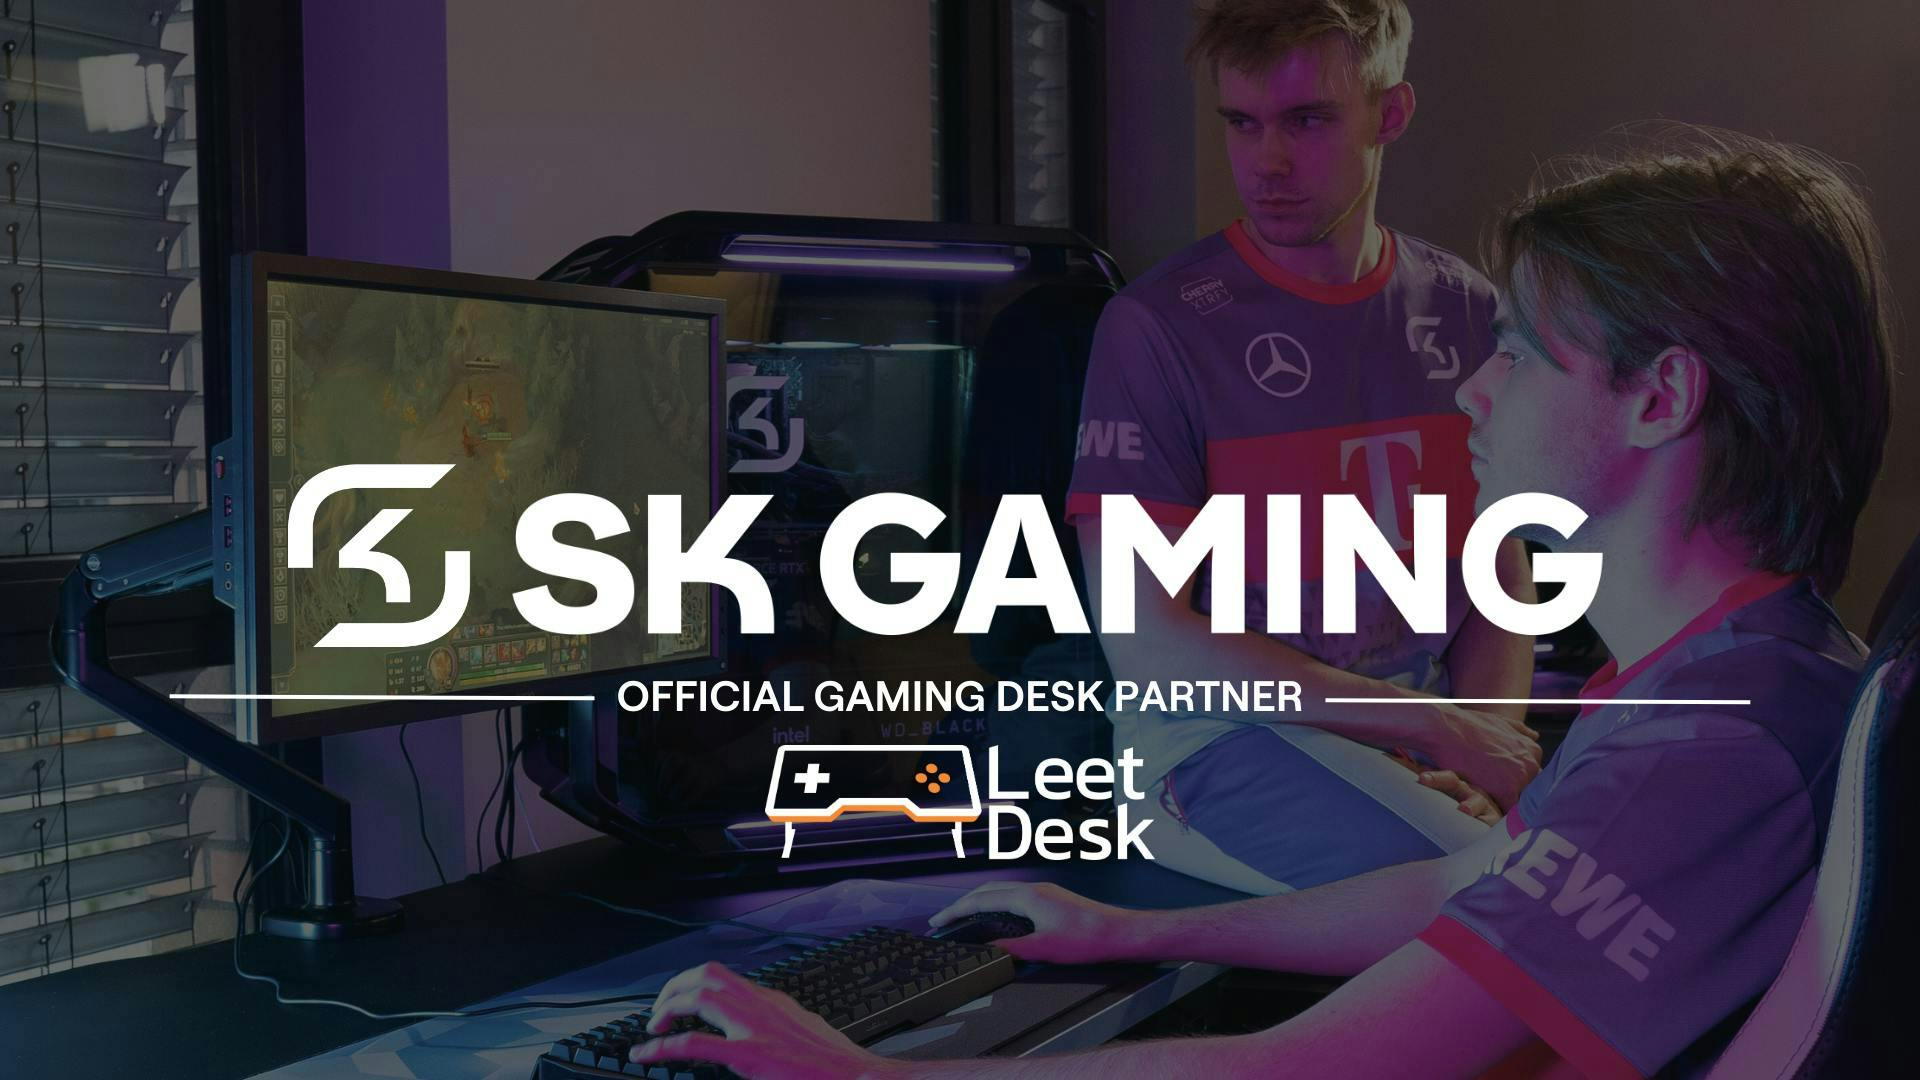 The two logos of SK Gaming and LeetDesk announcing the partnership and overlapping an image of SK Gaming members gaming on their LeetDesk.